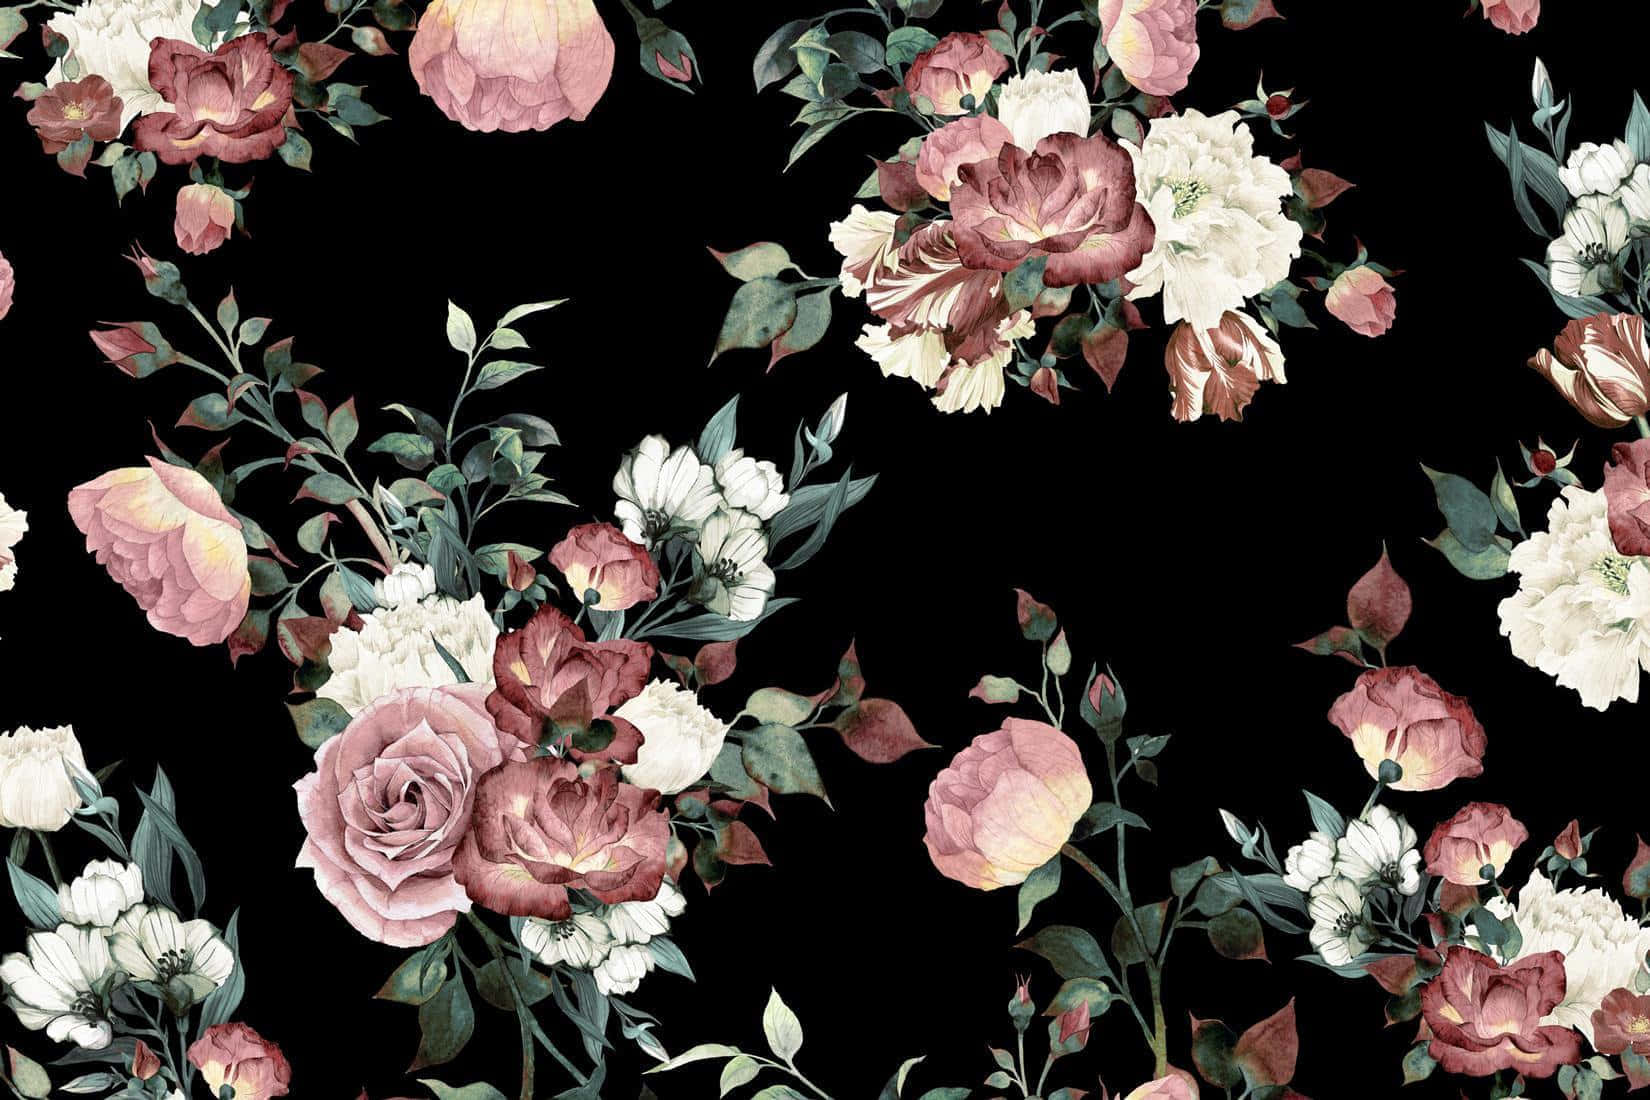 "Bright and Beautiful Vintage Flower Background"